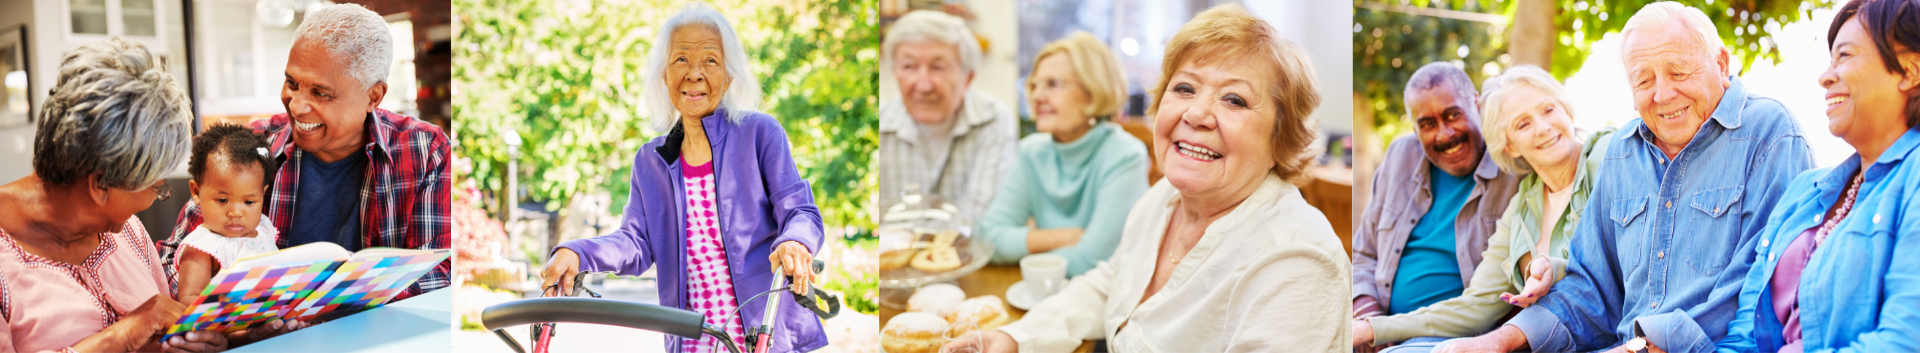 Four positive images of socially diverse older adults in the community, with friends and family